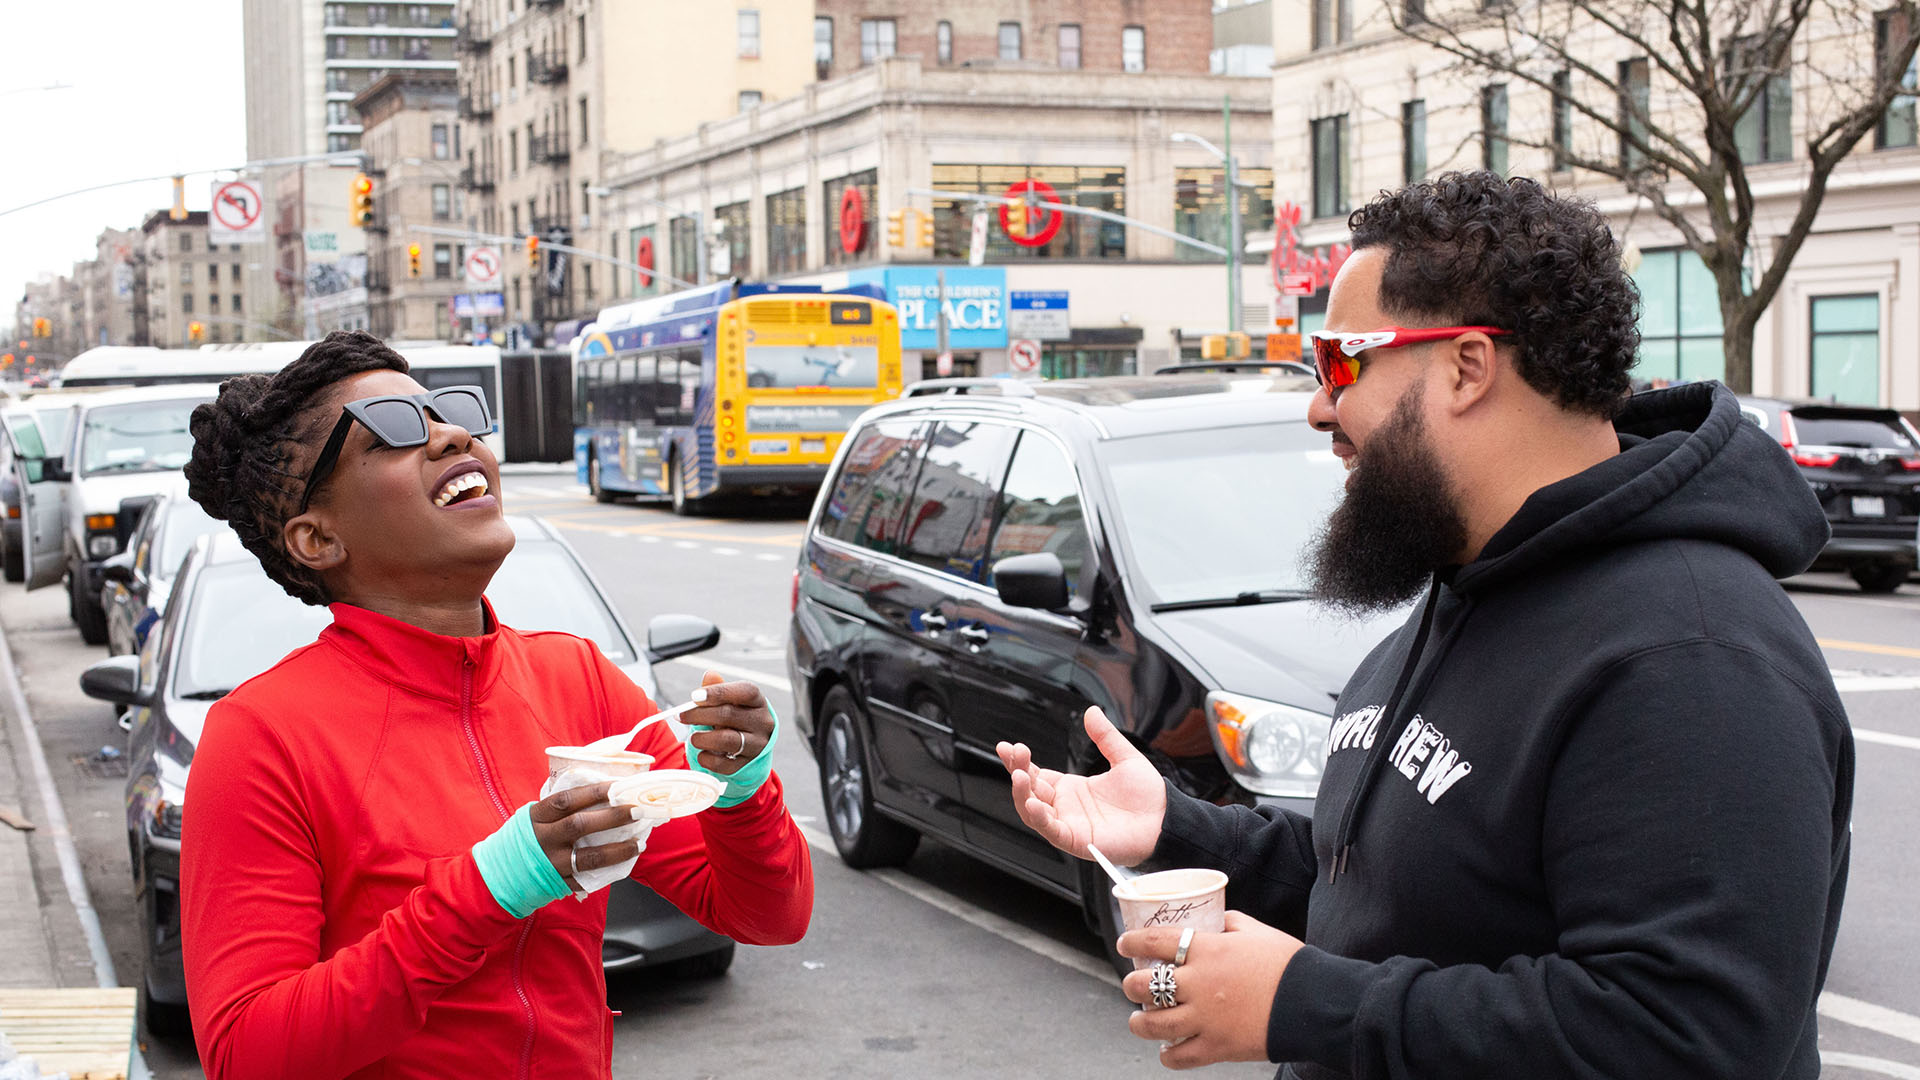 About the Journey host Oneika Raymond and We Run Uptown founder Hector Espinal talk and eat habichuelas con dulce on a Washington Heights street